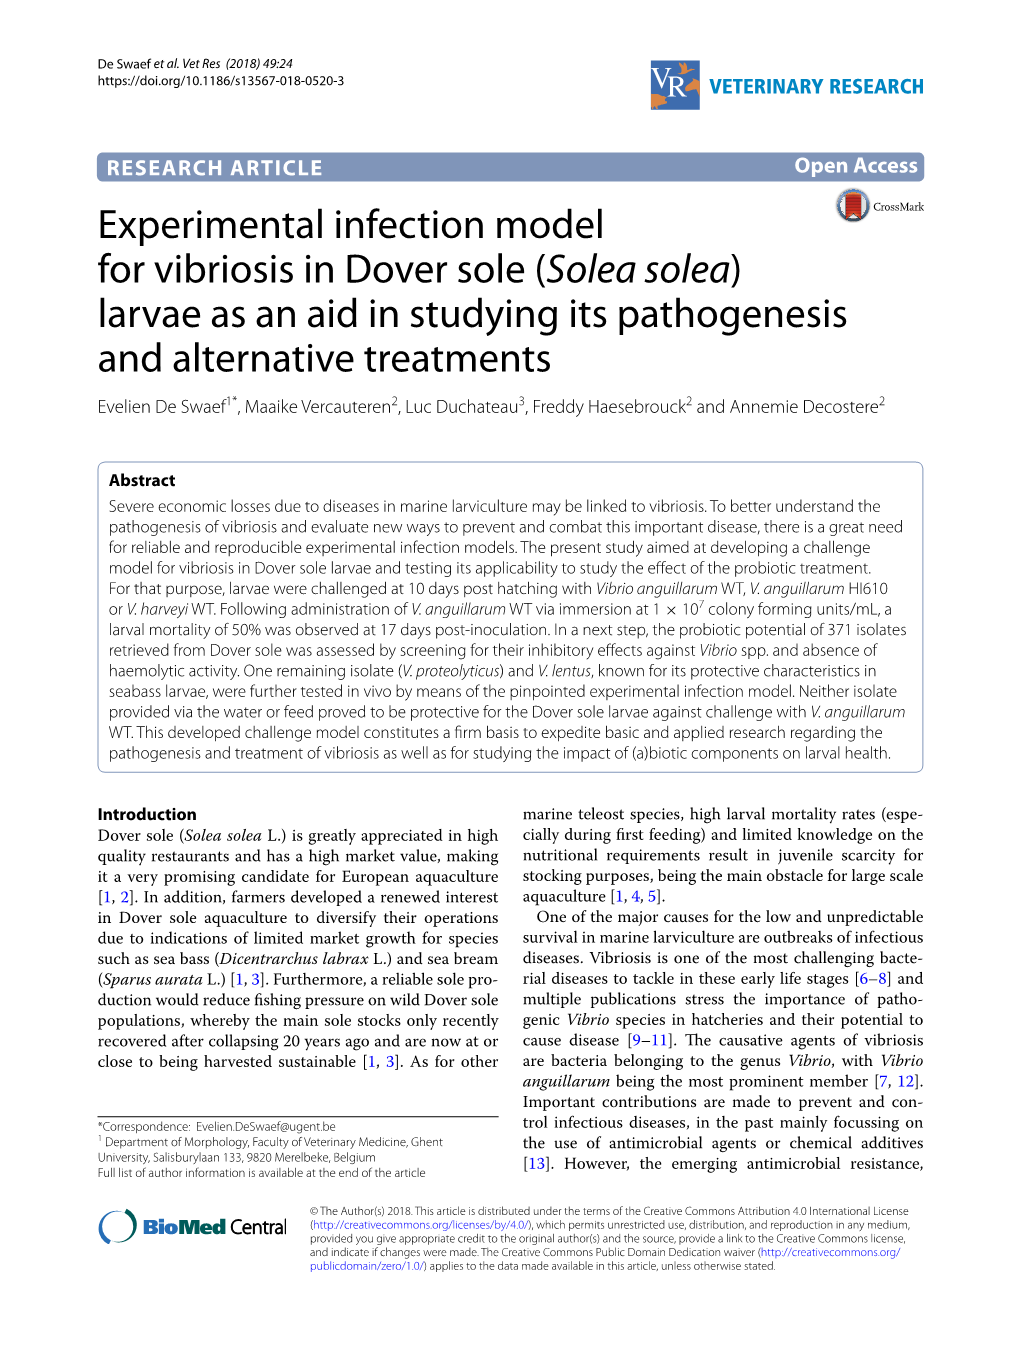 Experimental Infection Model for Vibriosis in Dover Sole